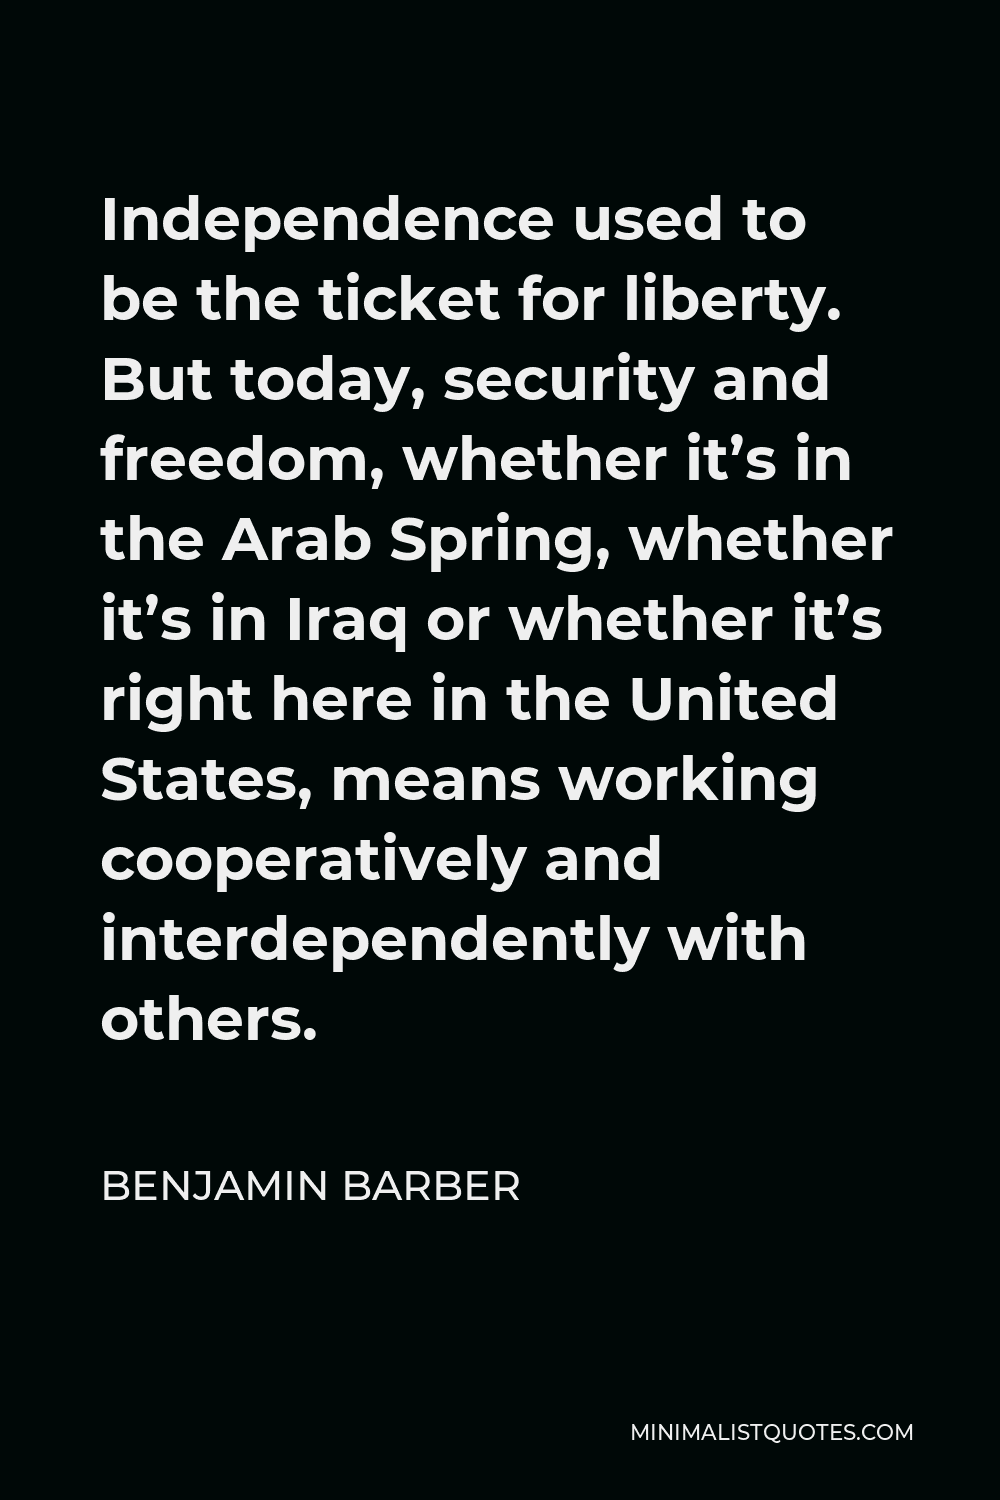 Benjamin Barber Quote - Independence used to be the ticket for liberty. But today, security and freedom, whether it’s in the Arab Spring, whether it’s in Iraq or whether it’s right here in the United States, means working cooperatively and interdependently with others.